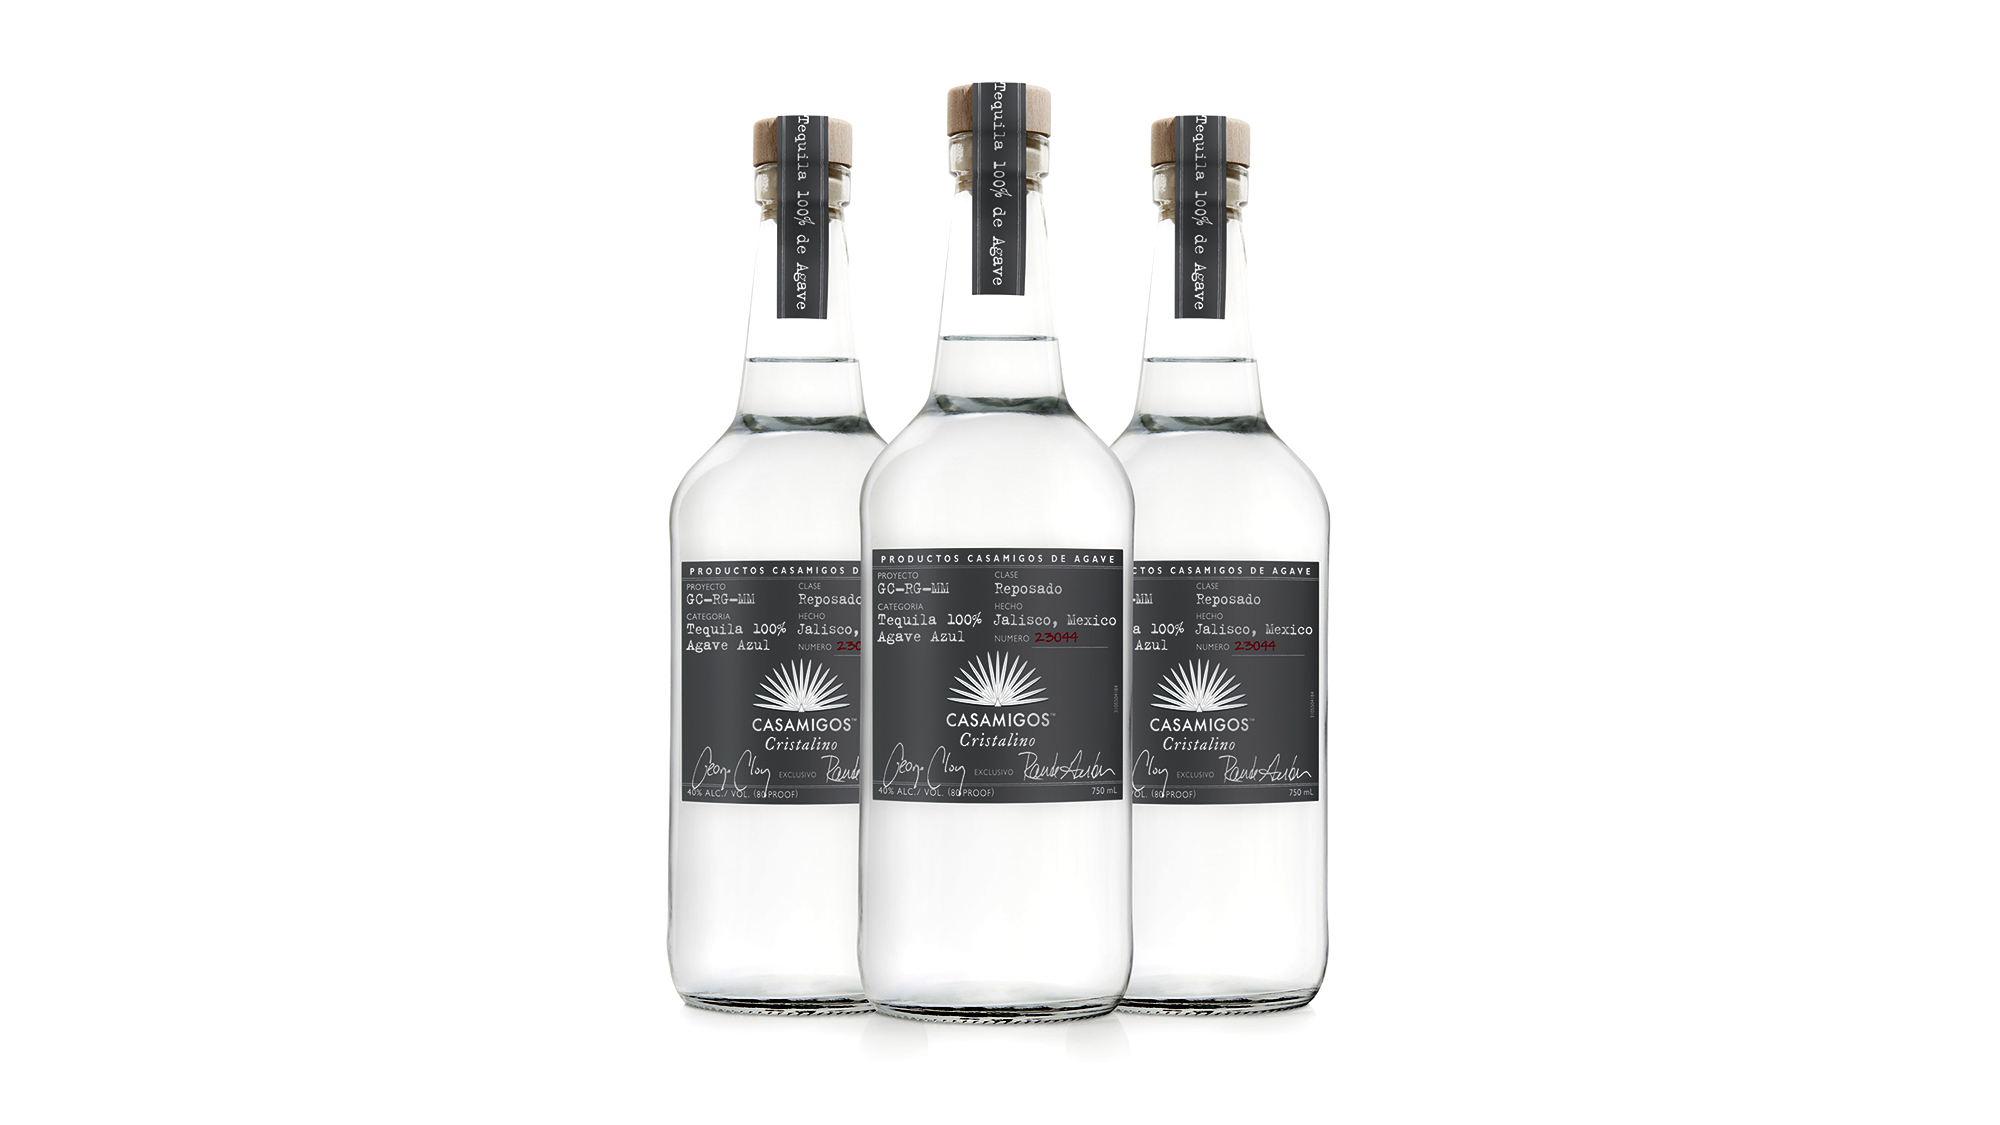 Casamigos Cristalino Reposado Becomes First New Tequila From Clooney In Five Years